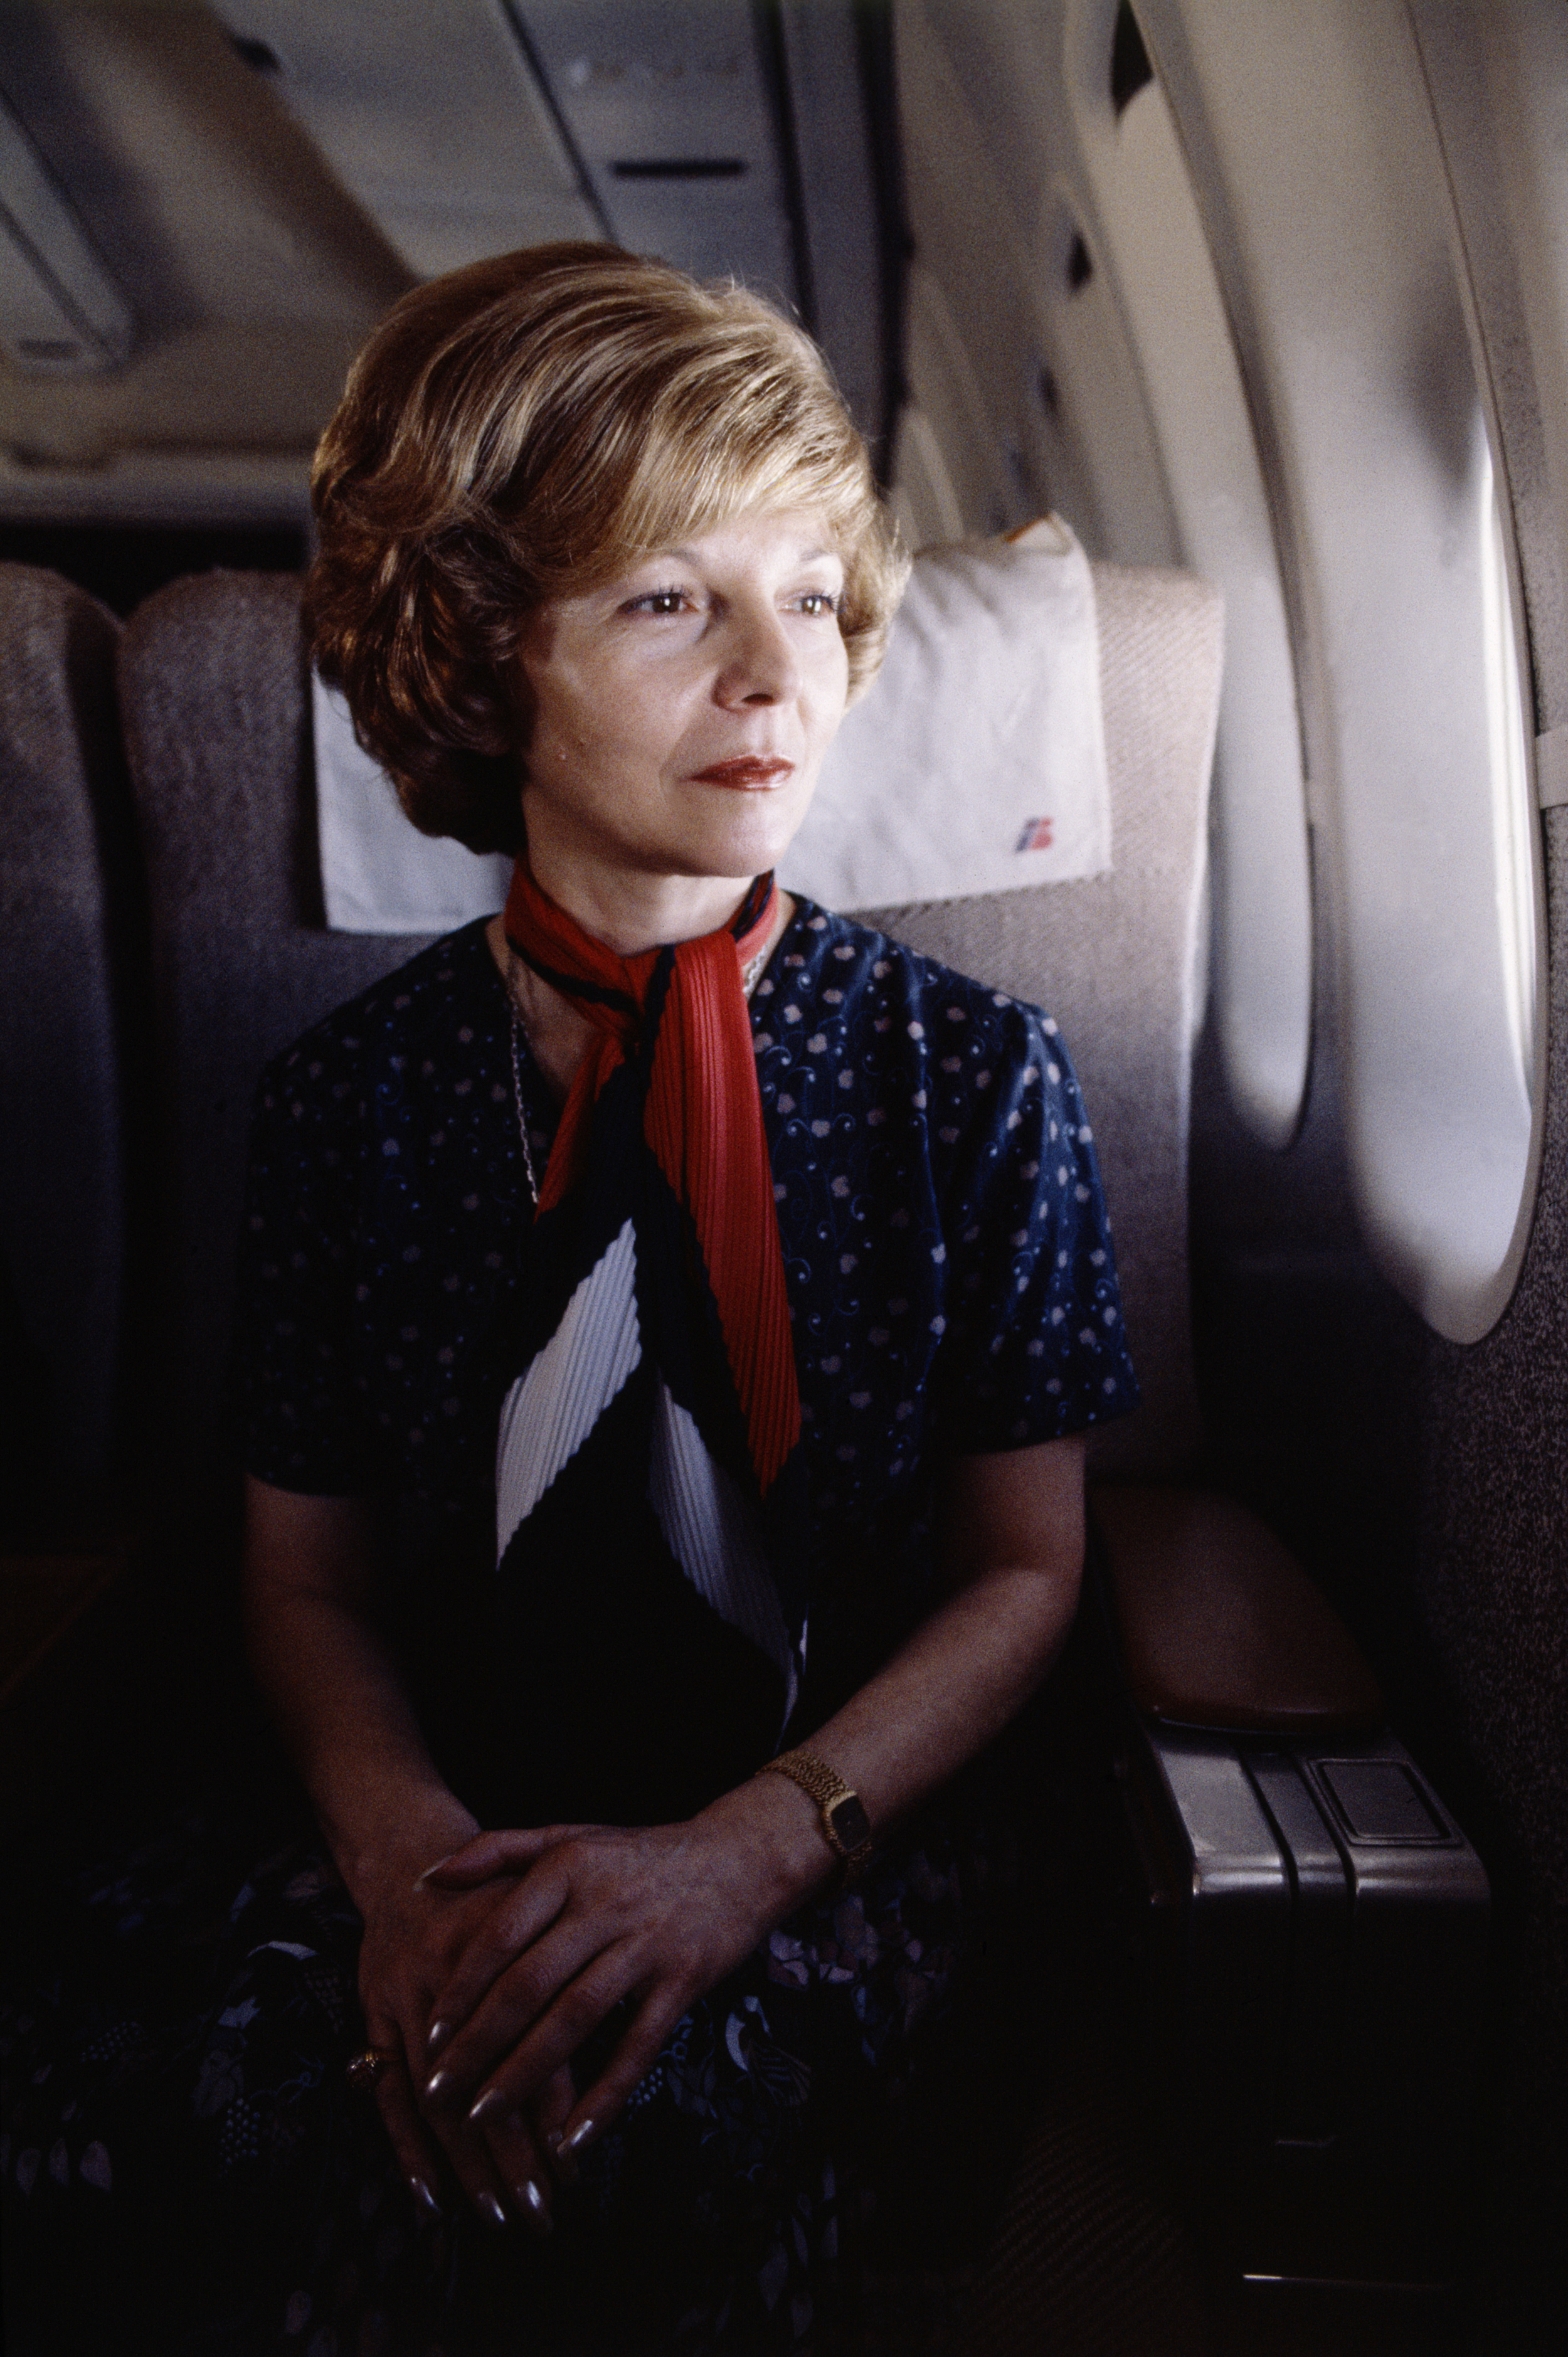  Isabel Perón on the plane leaving Argentina, exiled to Spain, 1981 